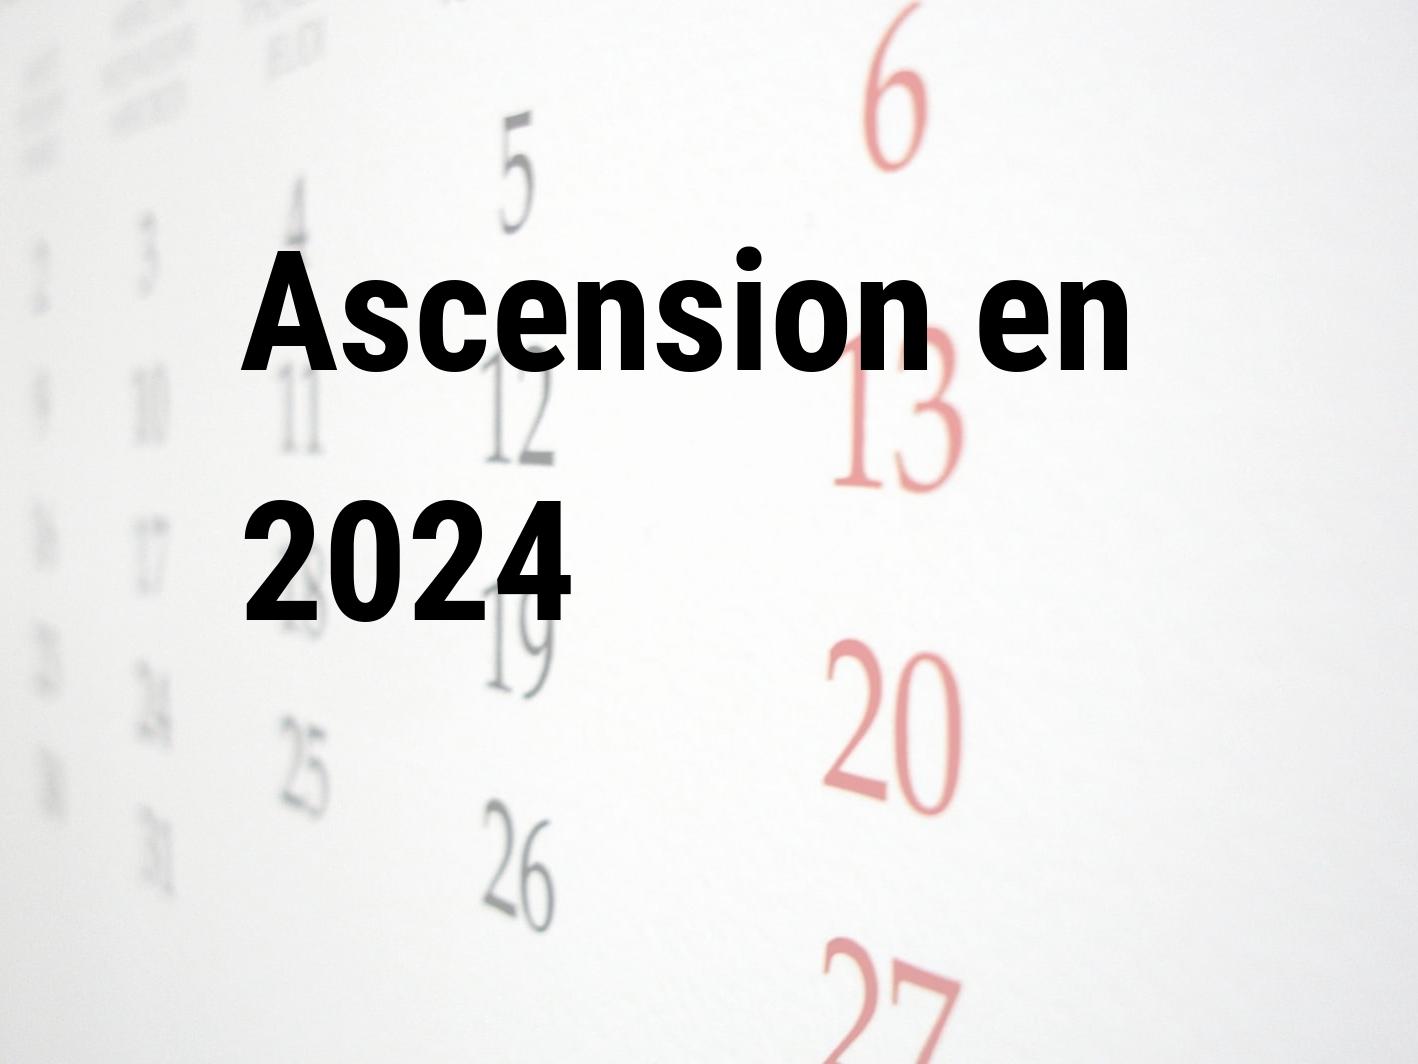 Ampimage.php?year=2024&country=fr&id=ascension&type=feast